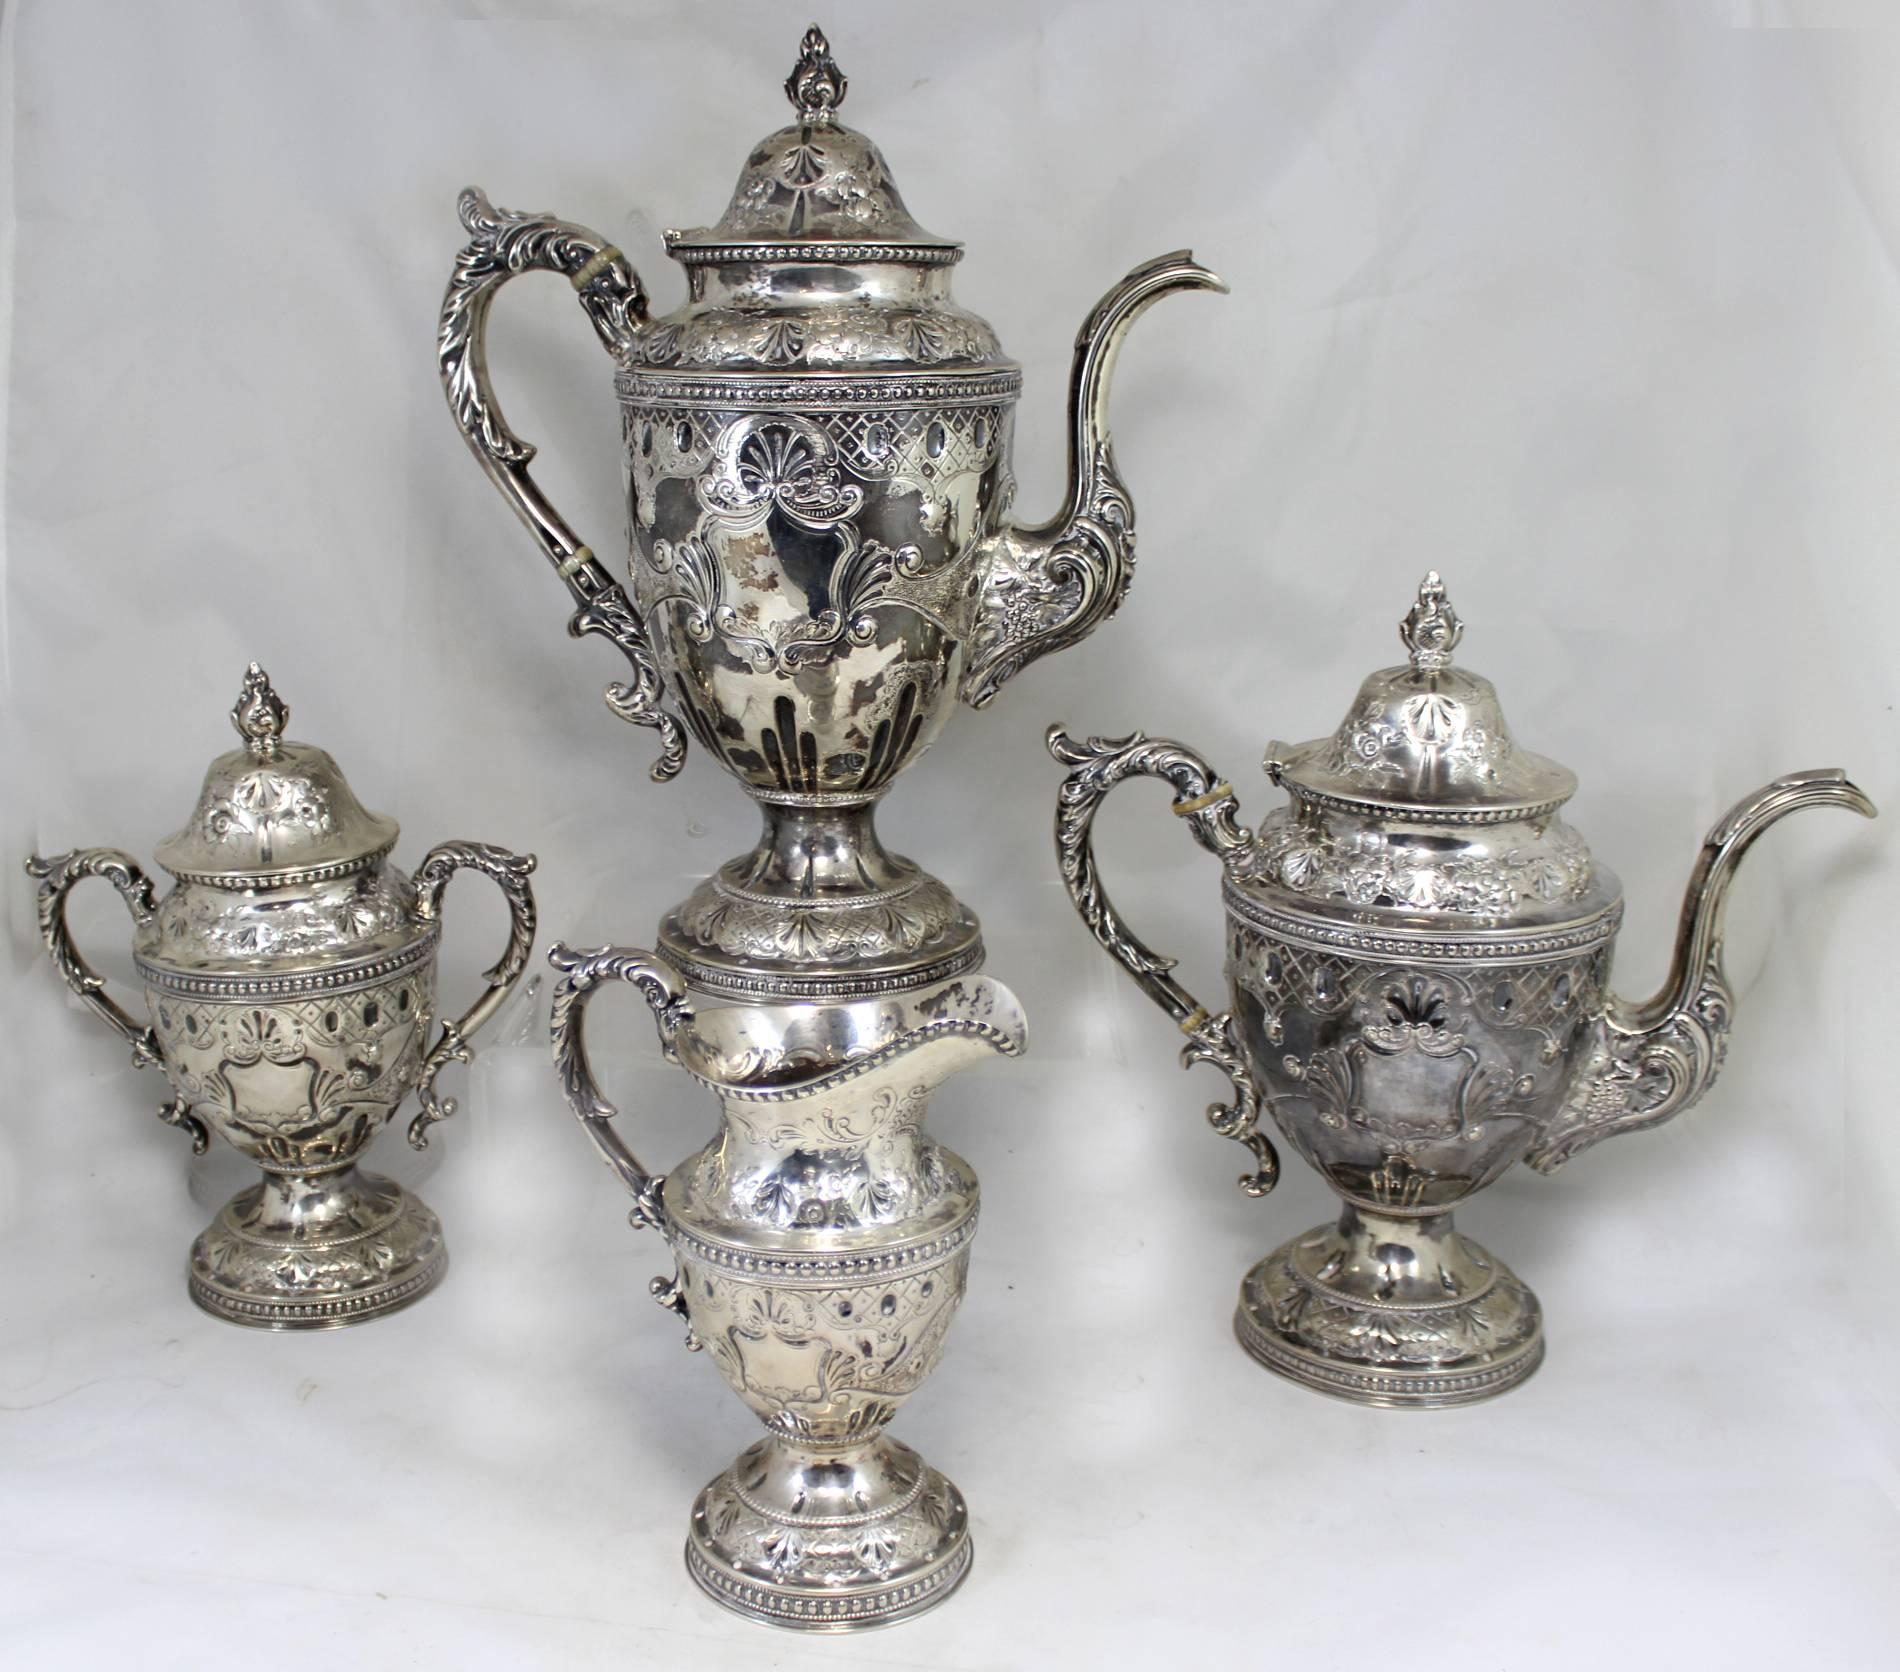 A splendid four-piece coin silver tea service with including coffee pot, tea pot, cream pitcher and covered handled sugar hallmarked by silversmith William Gale and Son, 116 Fulton Street, New York (1853-1866). Exquisite repousse with foliate